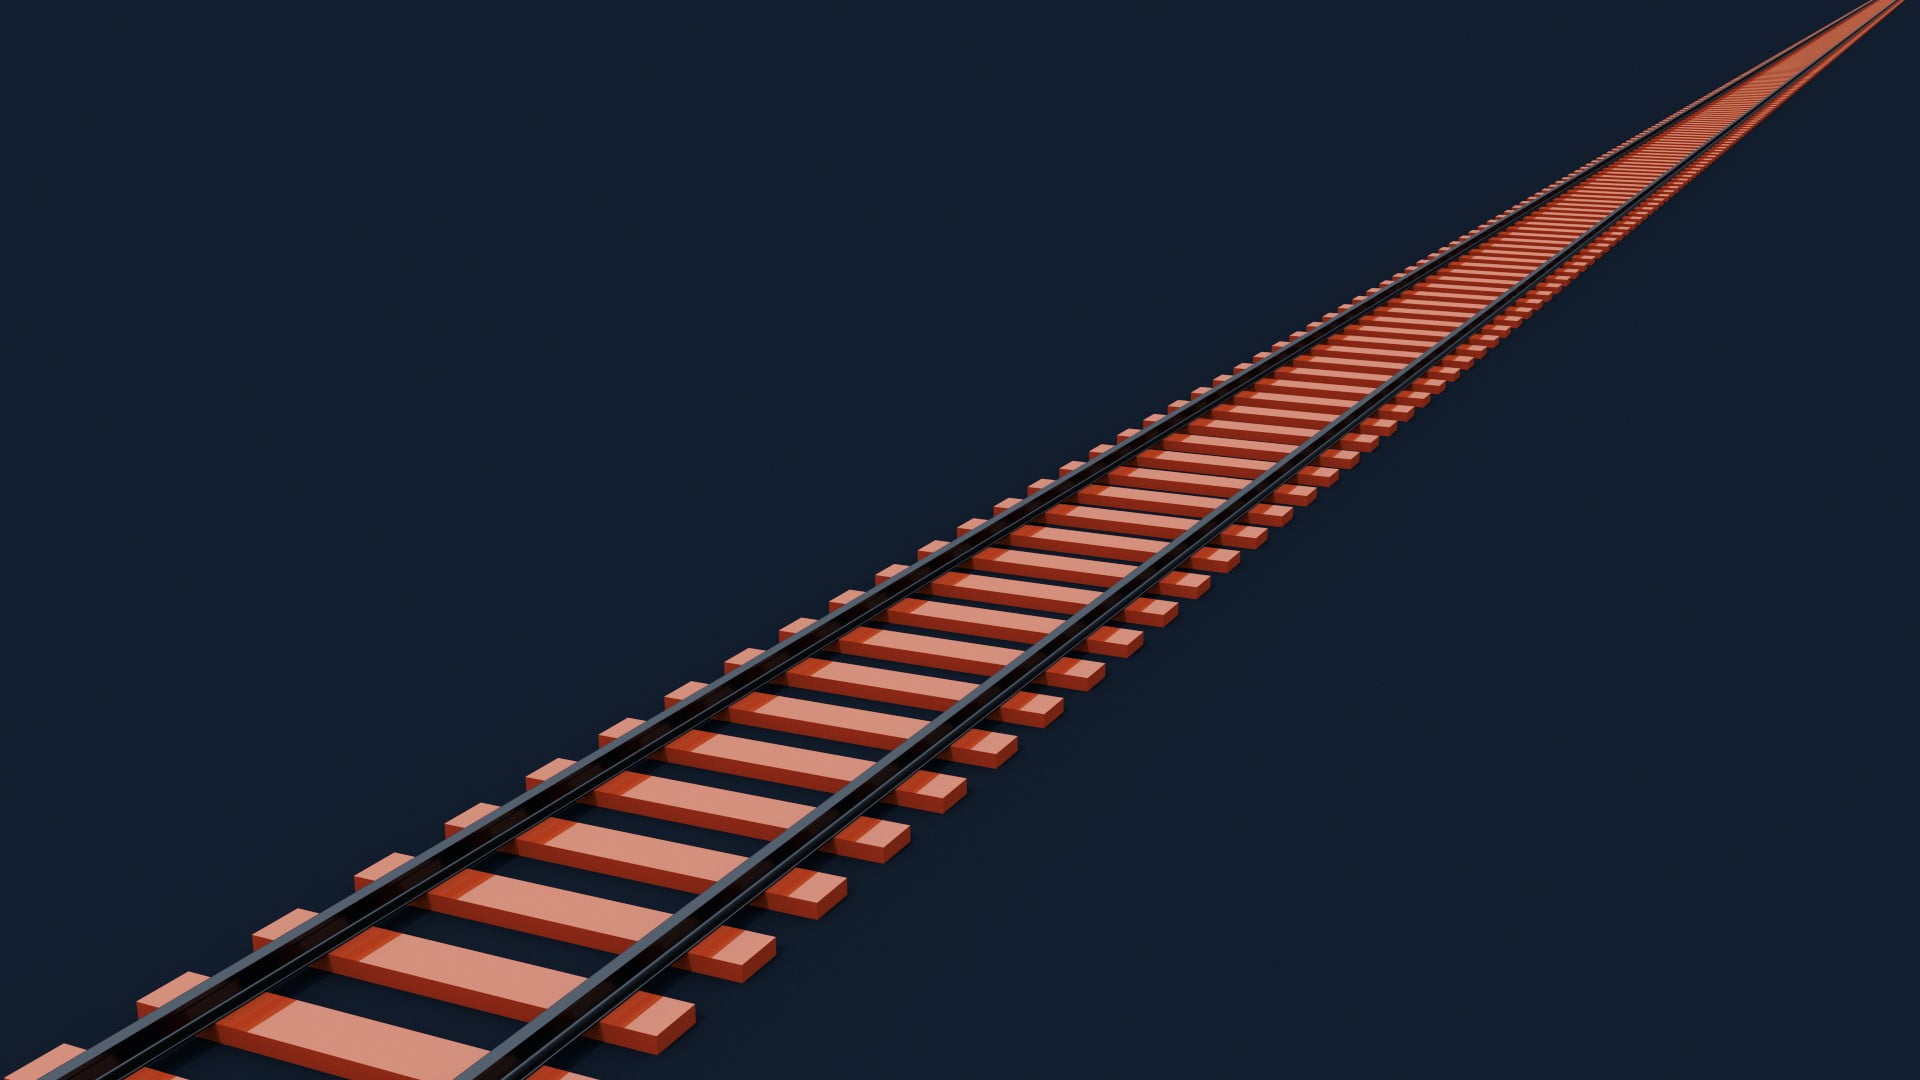 black and brown wooden bed frame, railway, train, abstract, orange